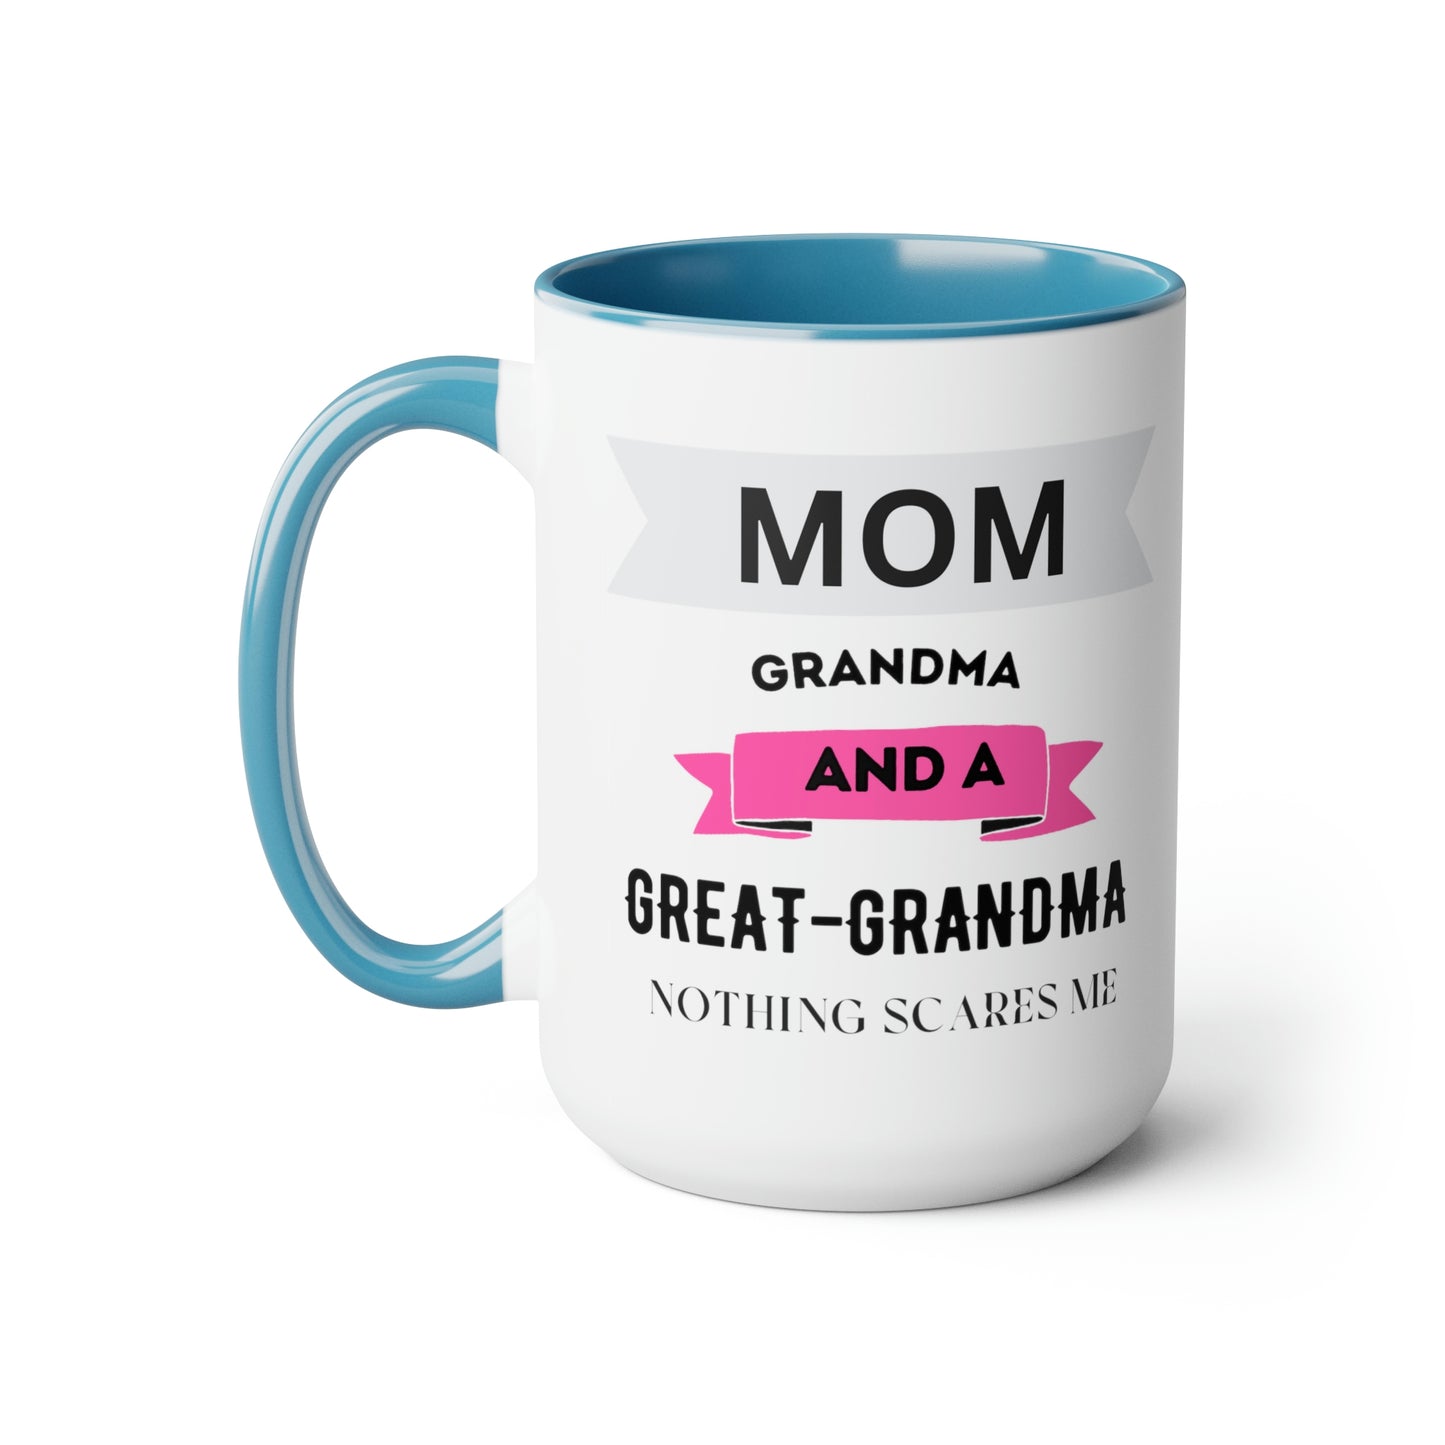 I am a Mom, Grandma and Great Grandma and Nothing Scares Me